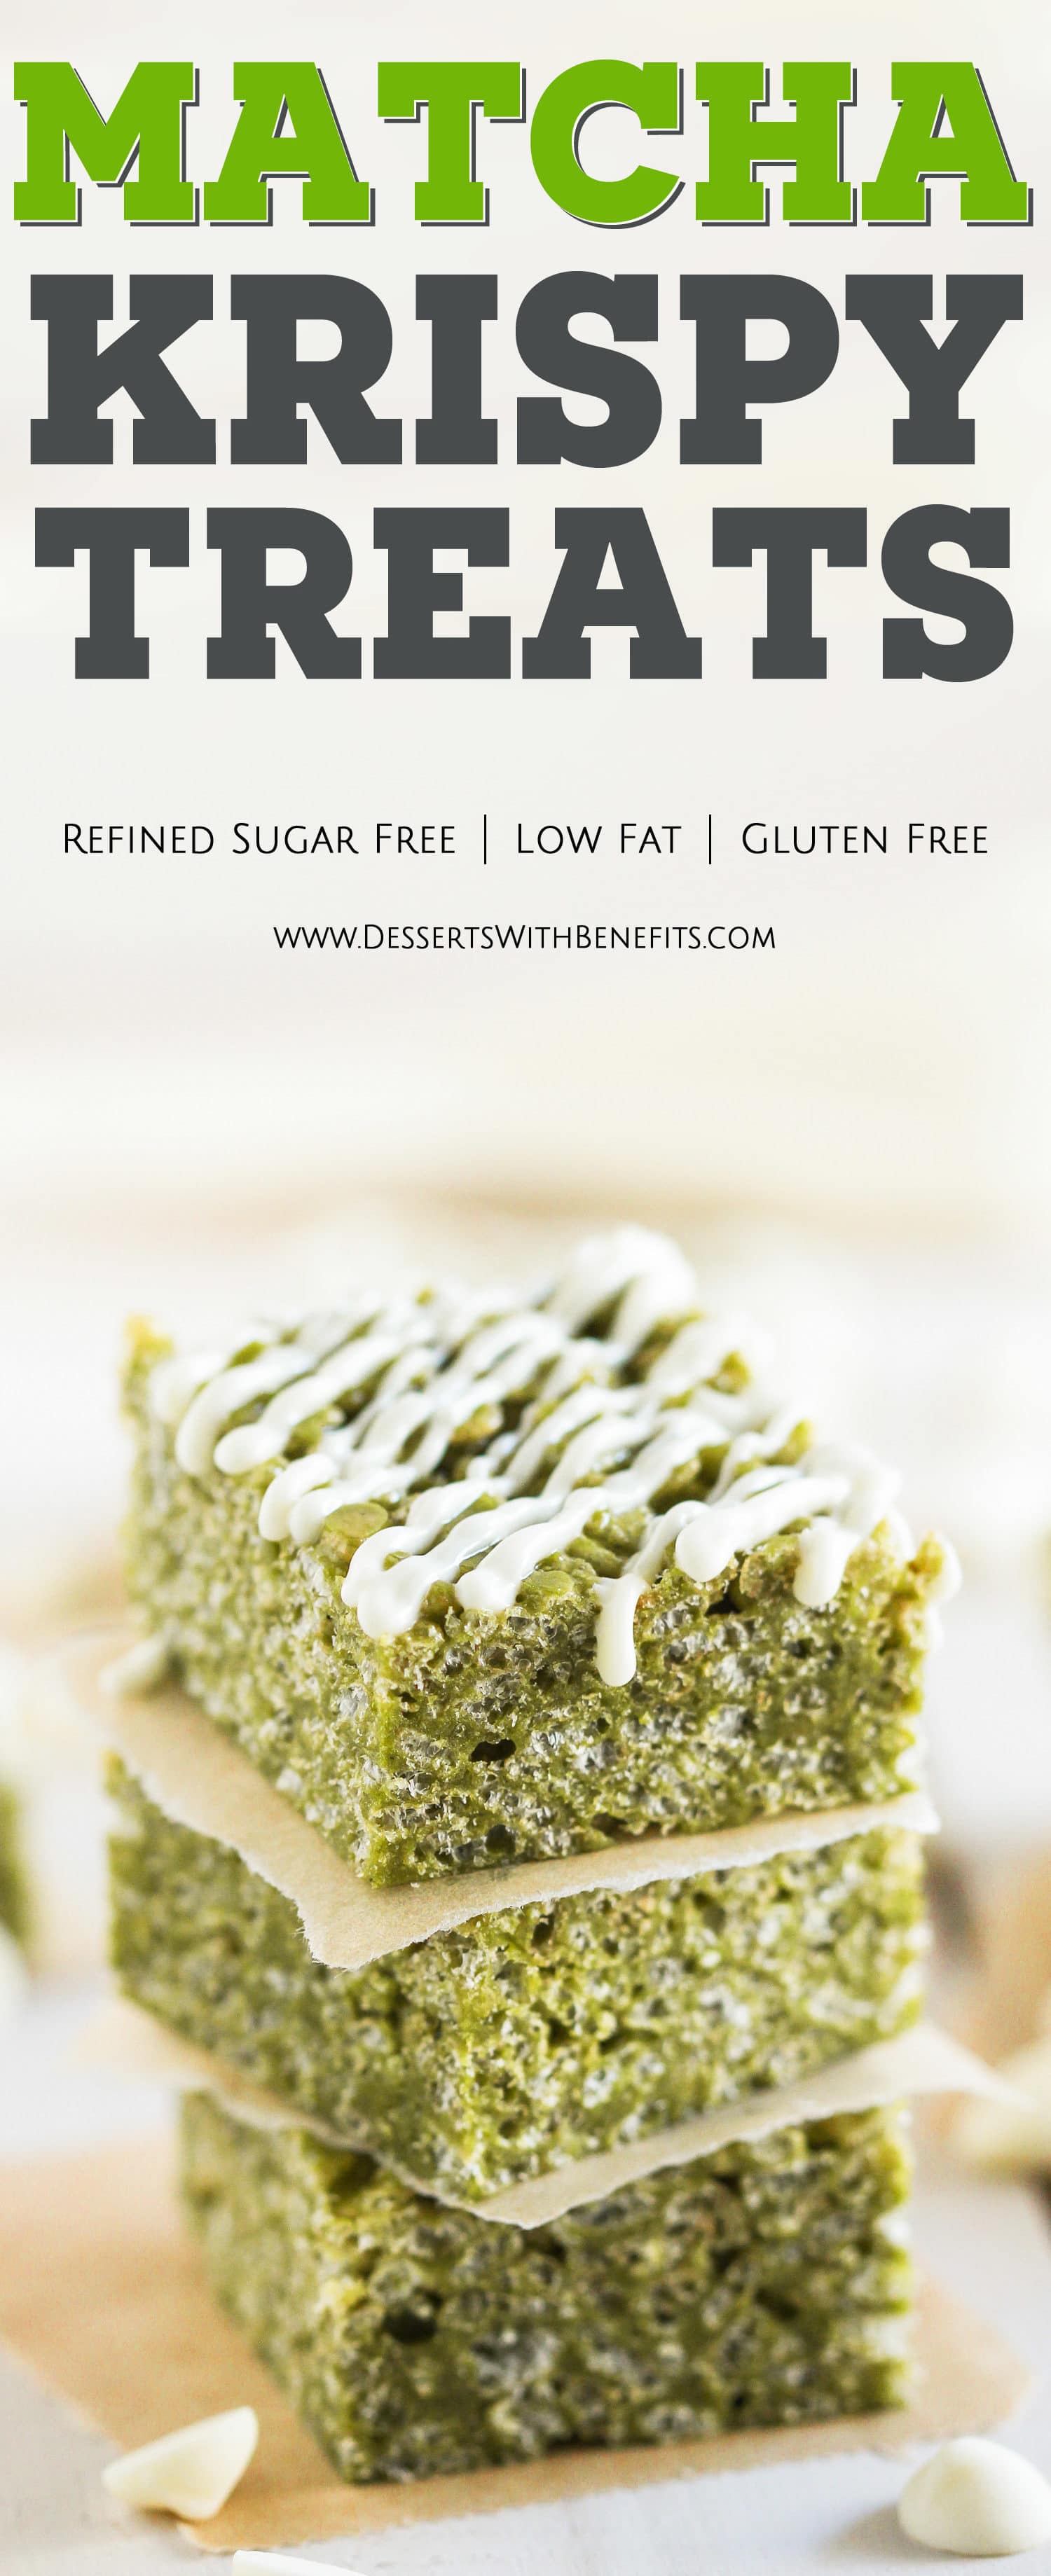 These Healthy Matcha Green Tea Krispy Treats have a subtle yet vibrant matcha flavor. They’re crunchy, chewy, and perfectly sweet – it’s heaven in a little square package! You’d never know they’re refined sugar free, low fat, and gluten free. Healthy Dessert Recipes at the Desserts With Benefits Blog